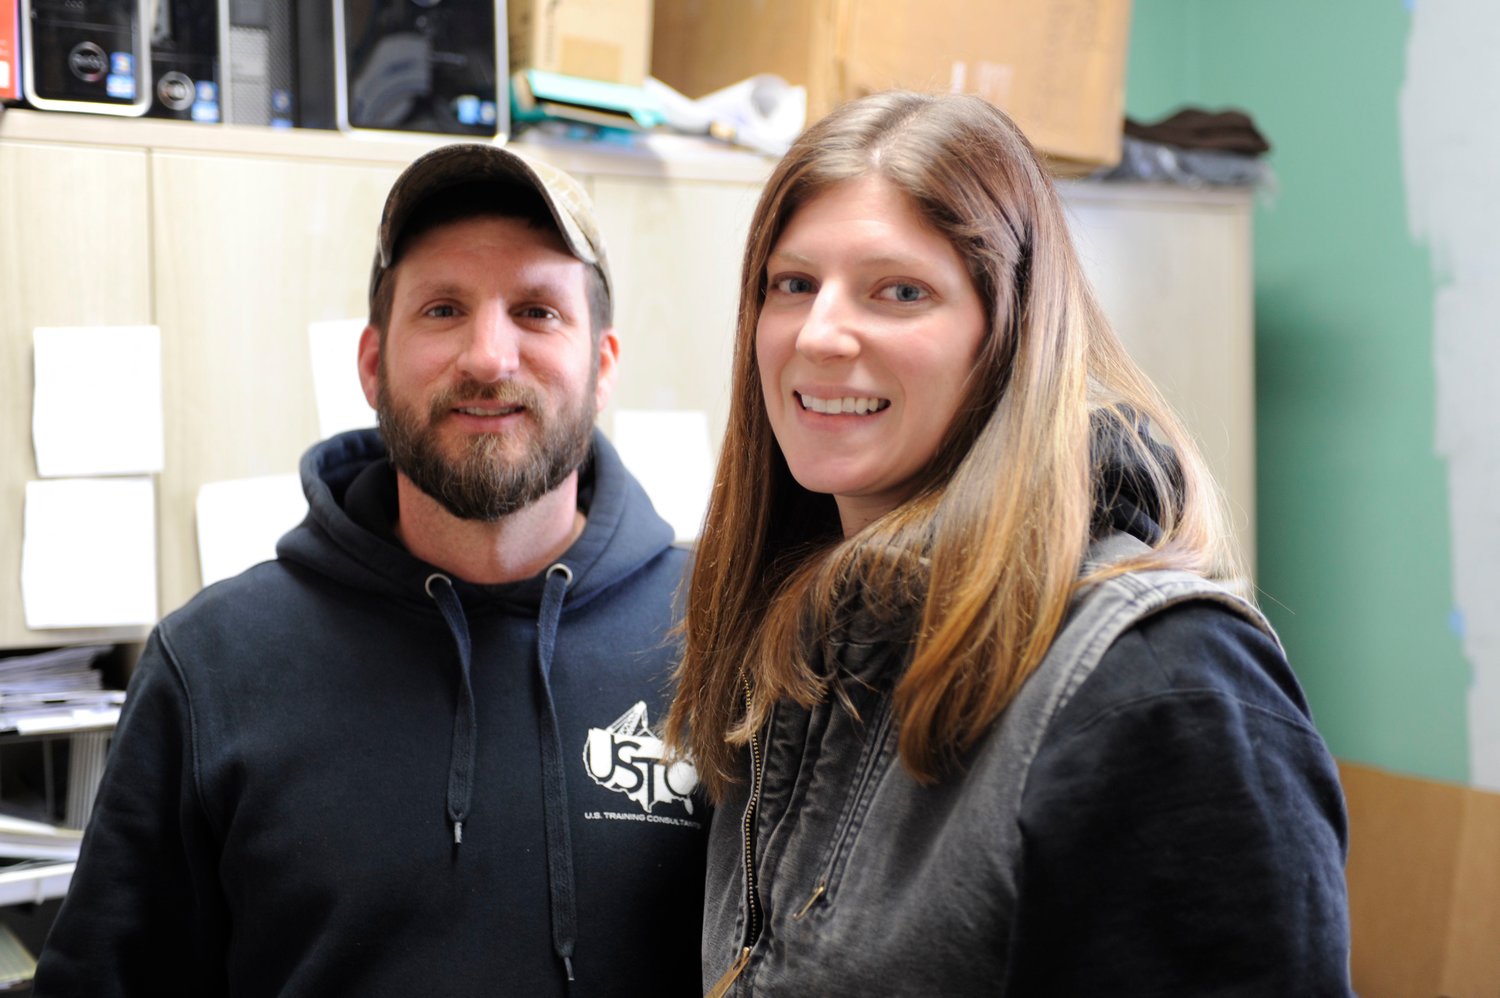 Kyle and Kaelin Salvatora are the new owners of Delaware Valley Farm & Garden in Callicoon.